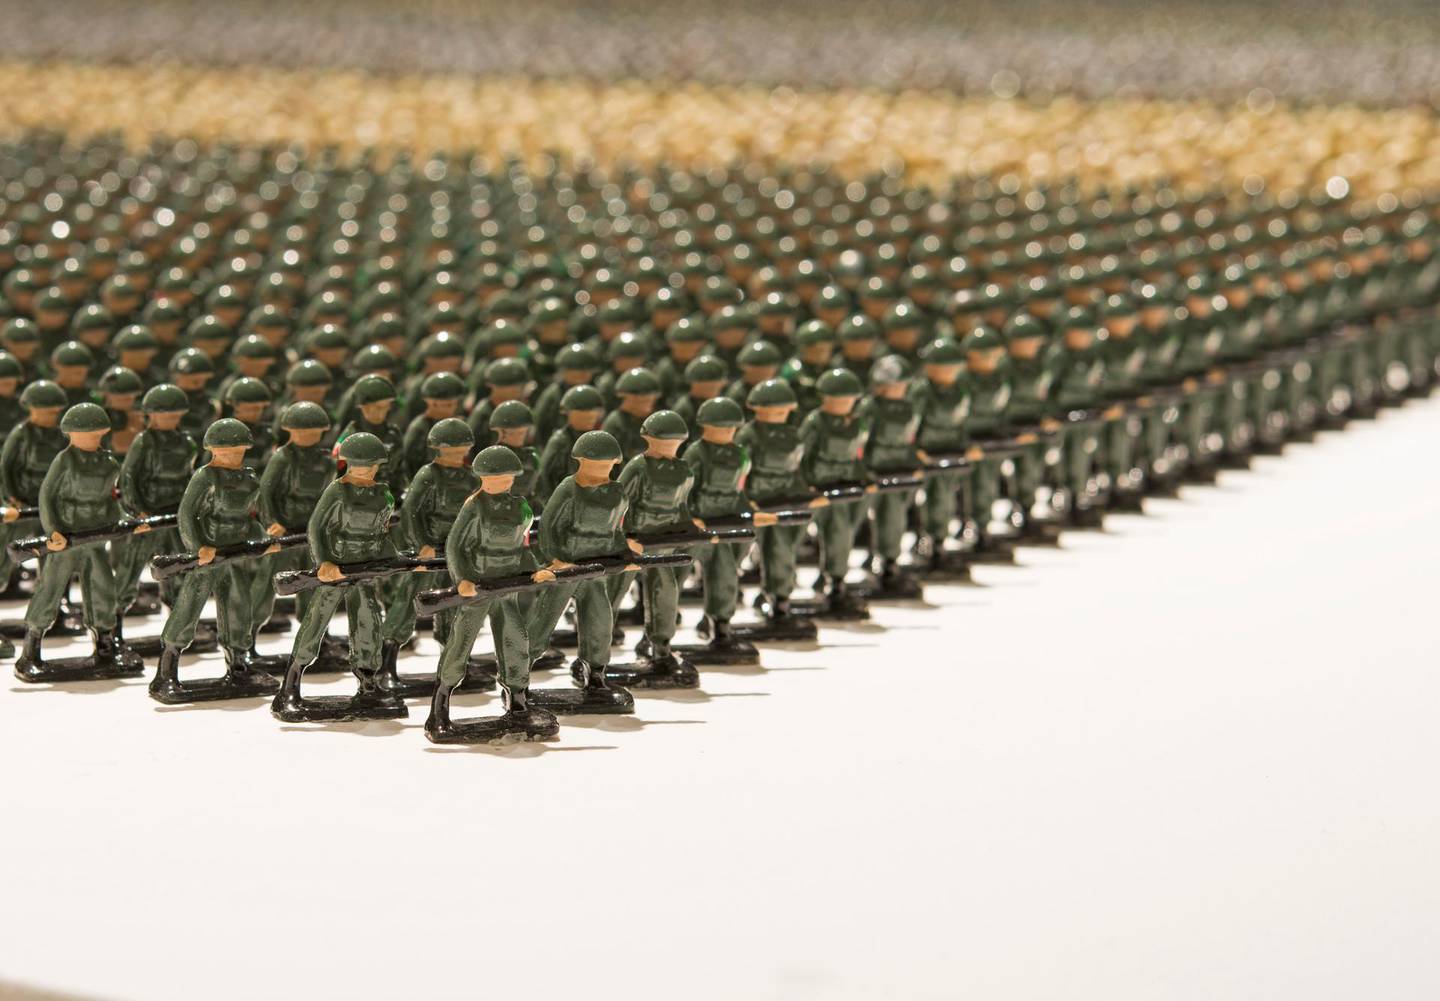 ‘Tin Soldiers’, (2011), an installation of 12,261 hand-painted toy troops illustrating Arab armies in 2010. Each figure represents 200 soldiers. Courtesy Sharjah Art Foundation